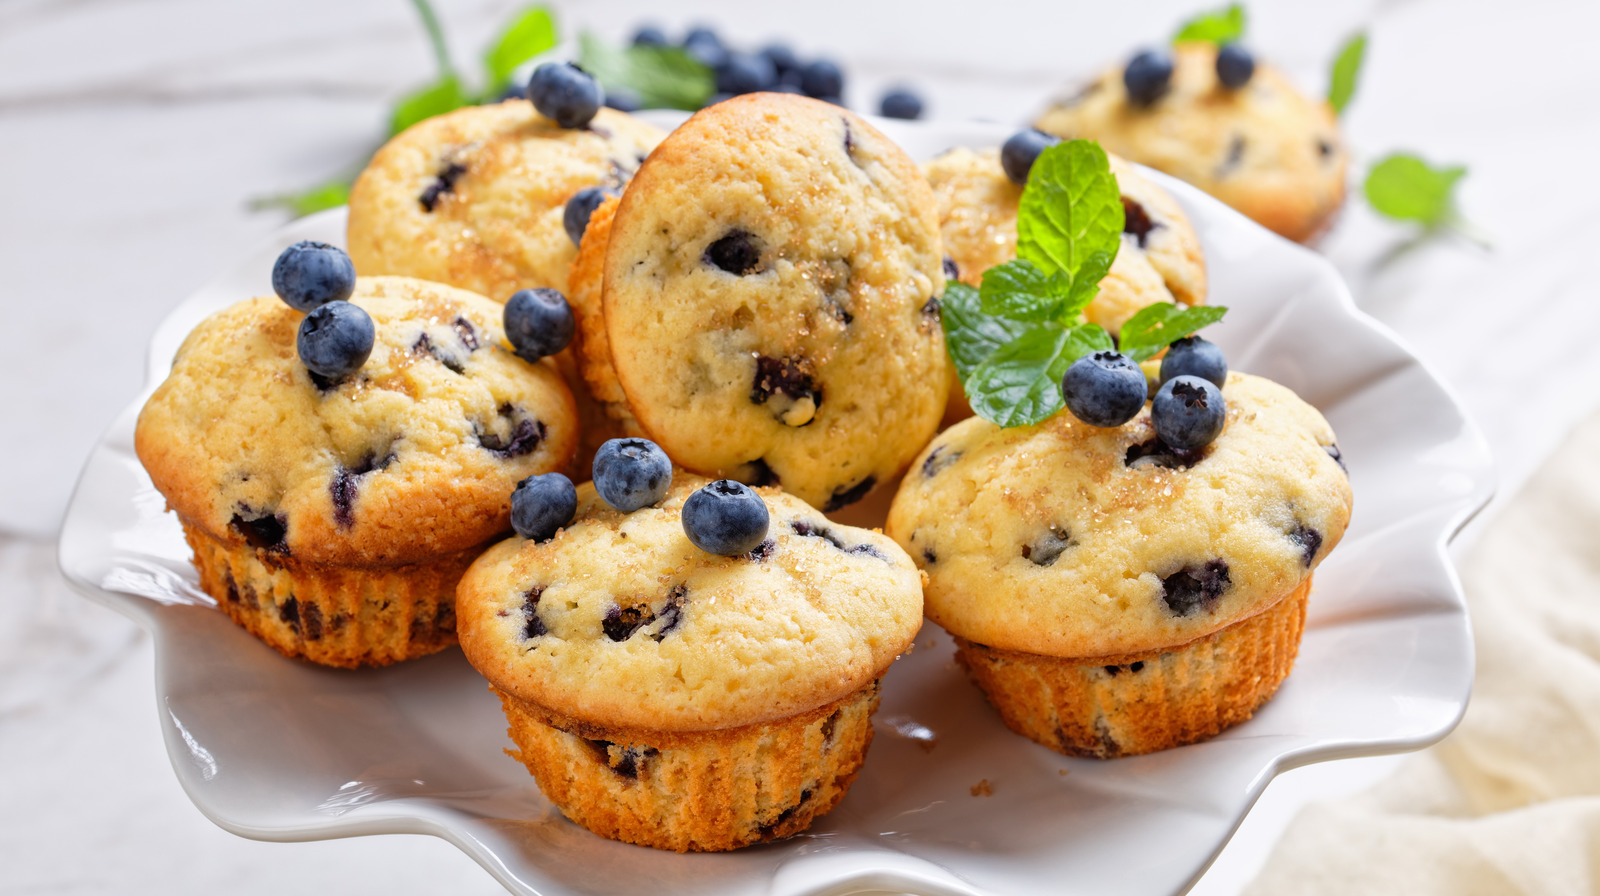 https://www.thedailymeal.com/img/gallery/how-to-easily-free-muffins-from-their-tin-without-liners/l-intro-1682518501.jpg